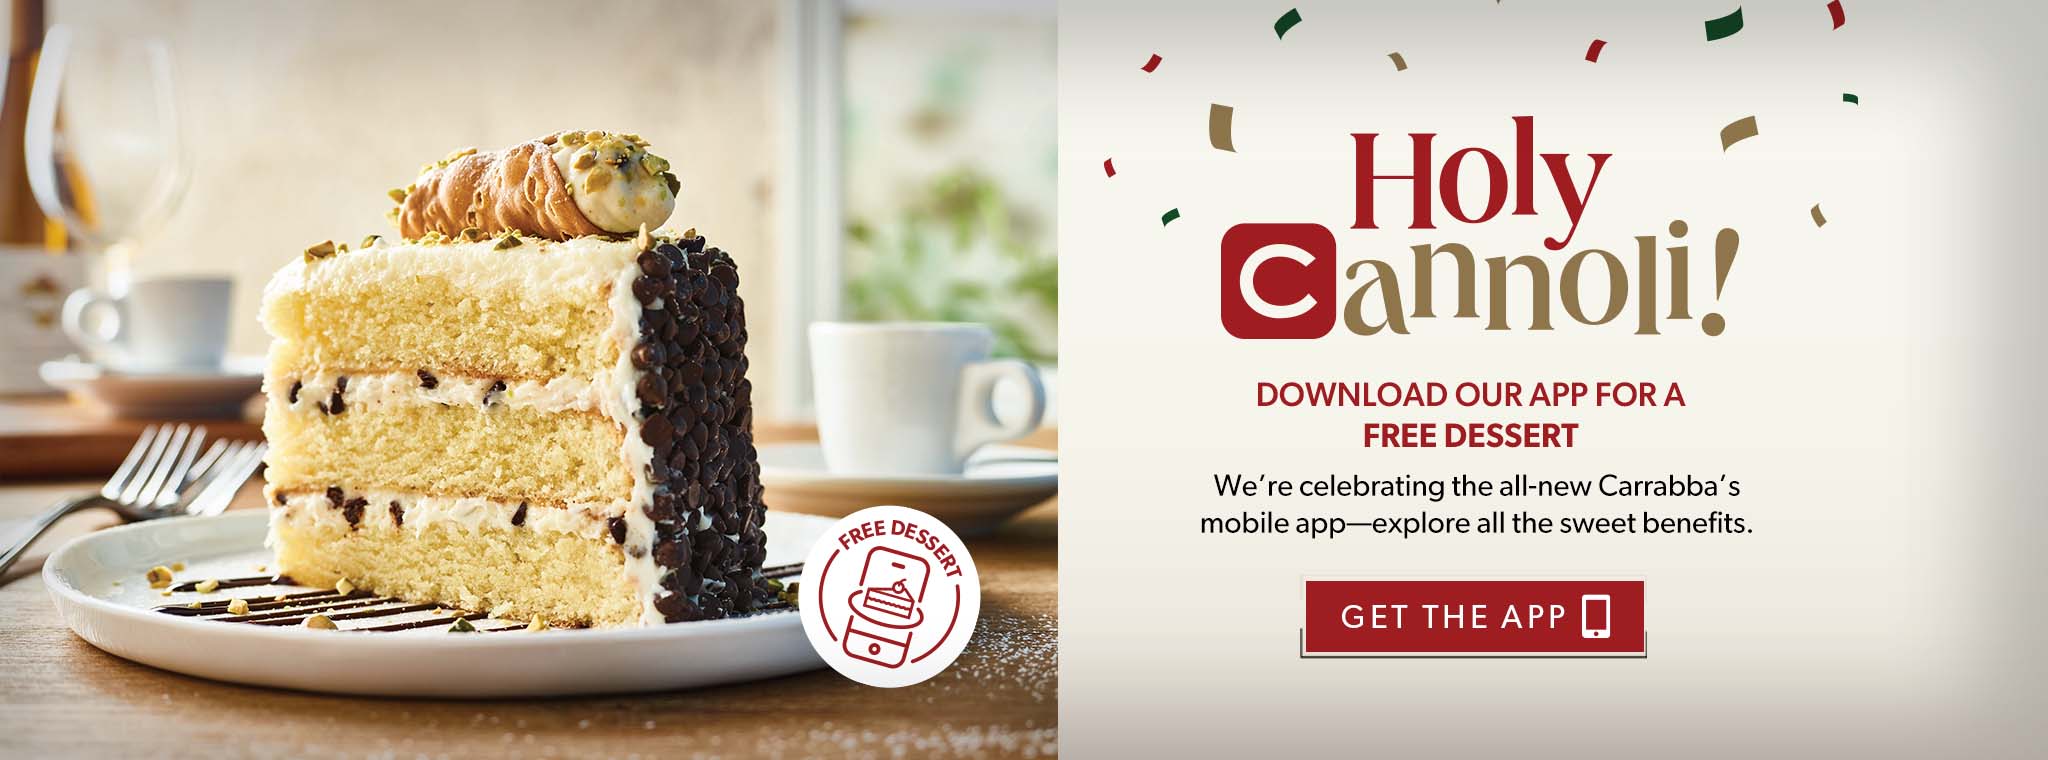 Holy Cannoli! Download our app for a free dessert